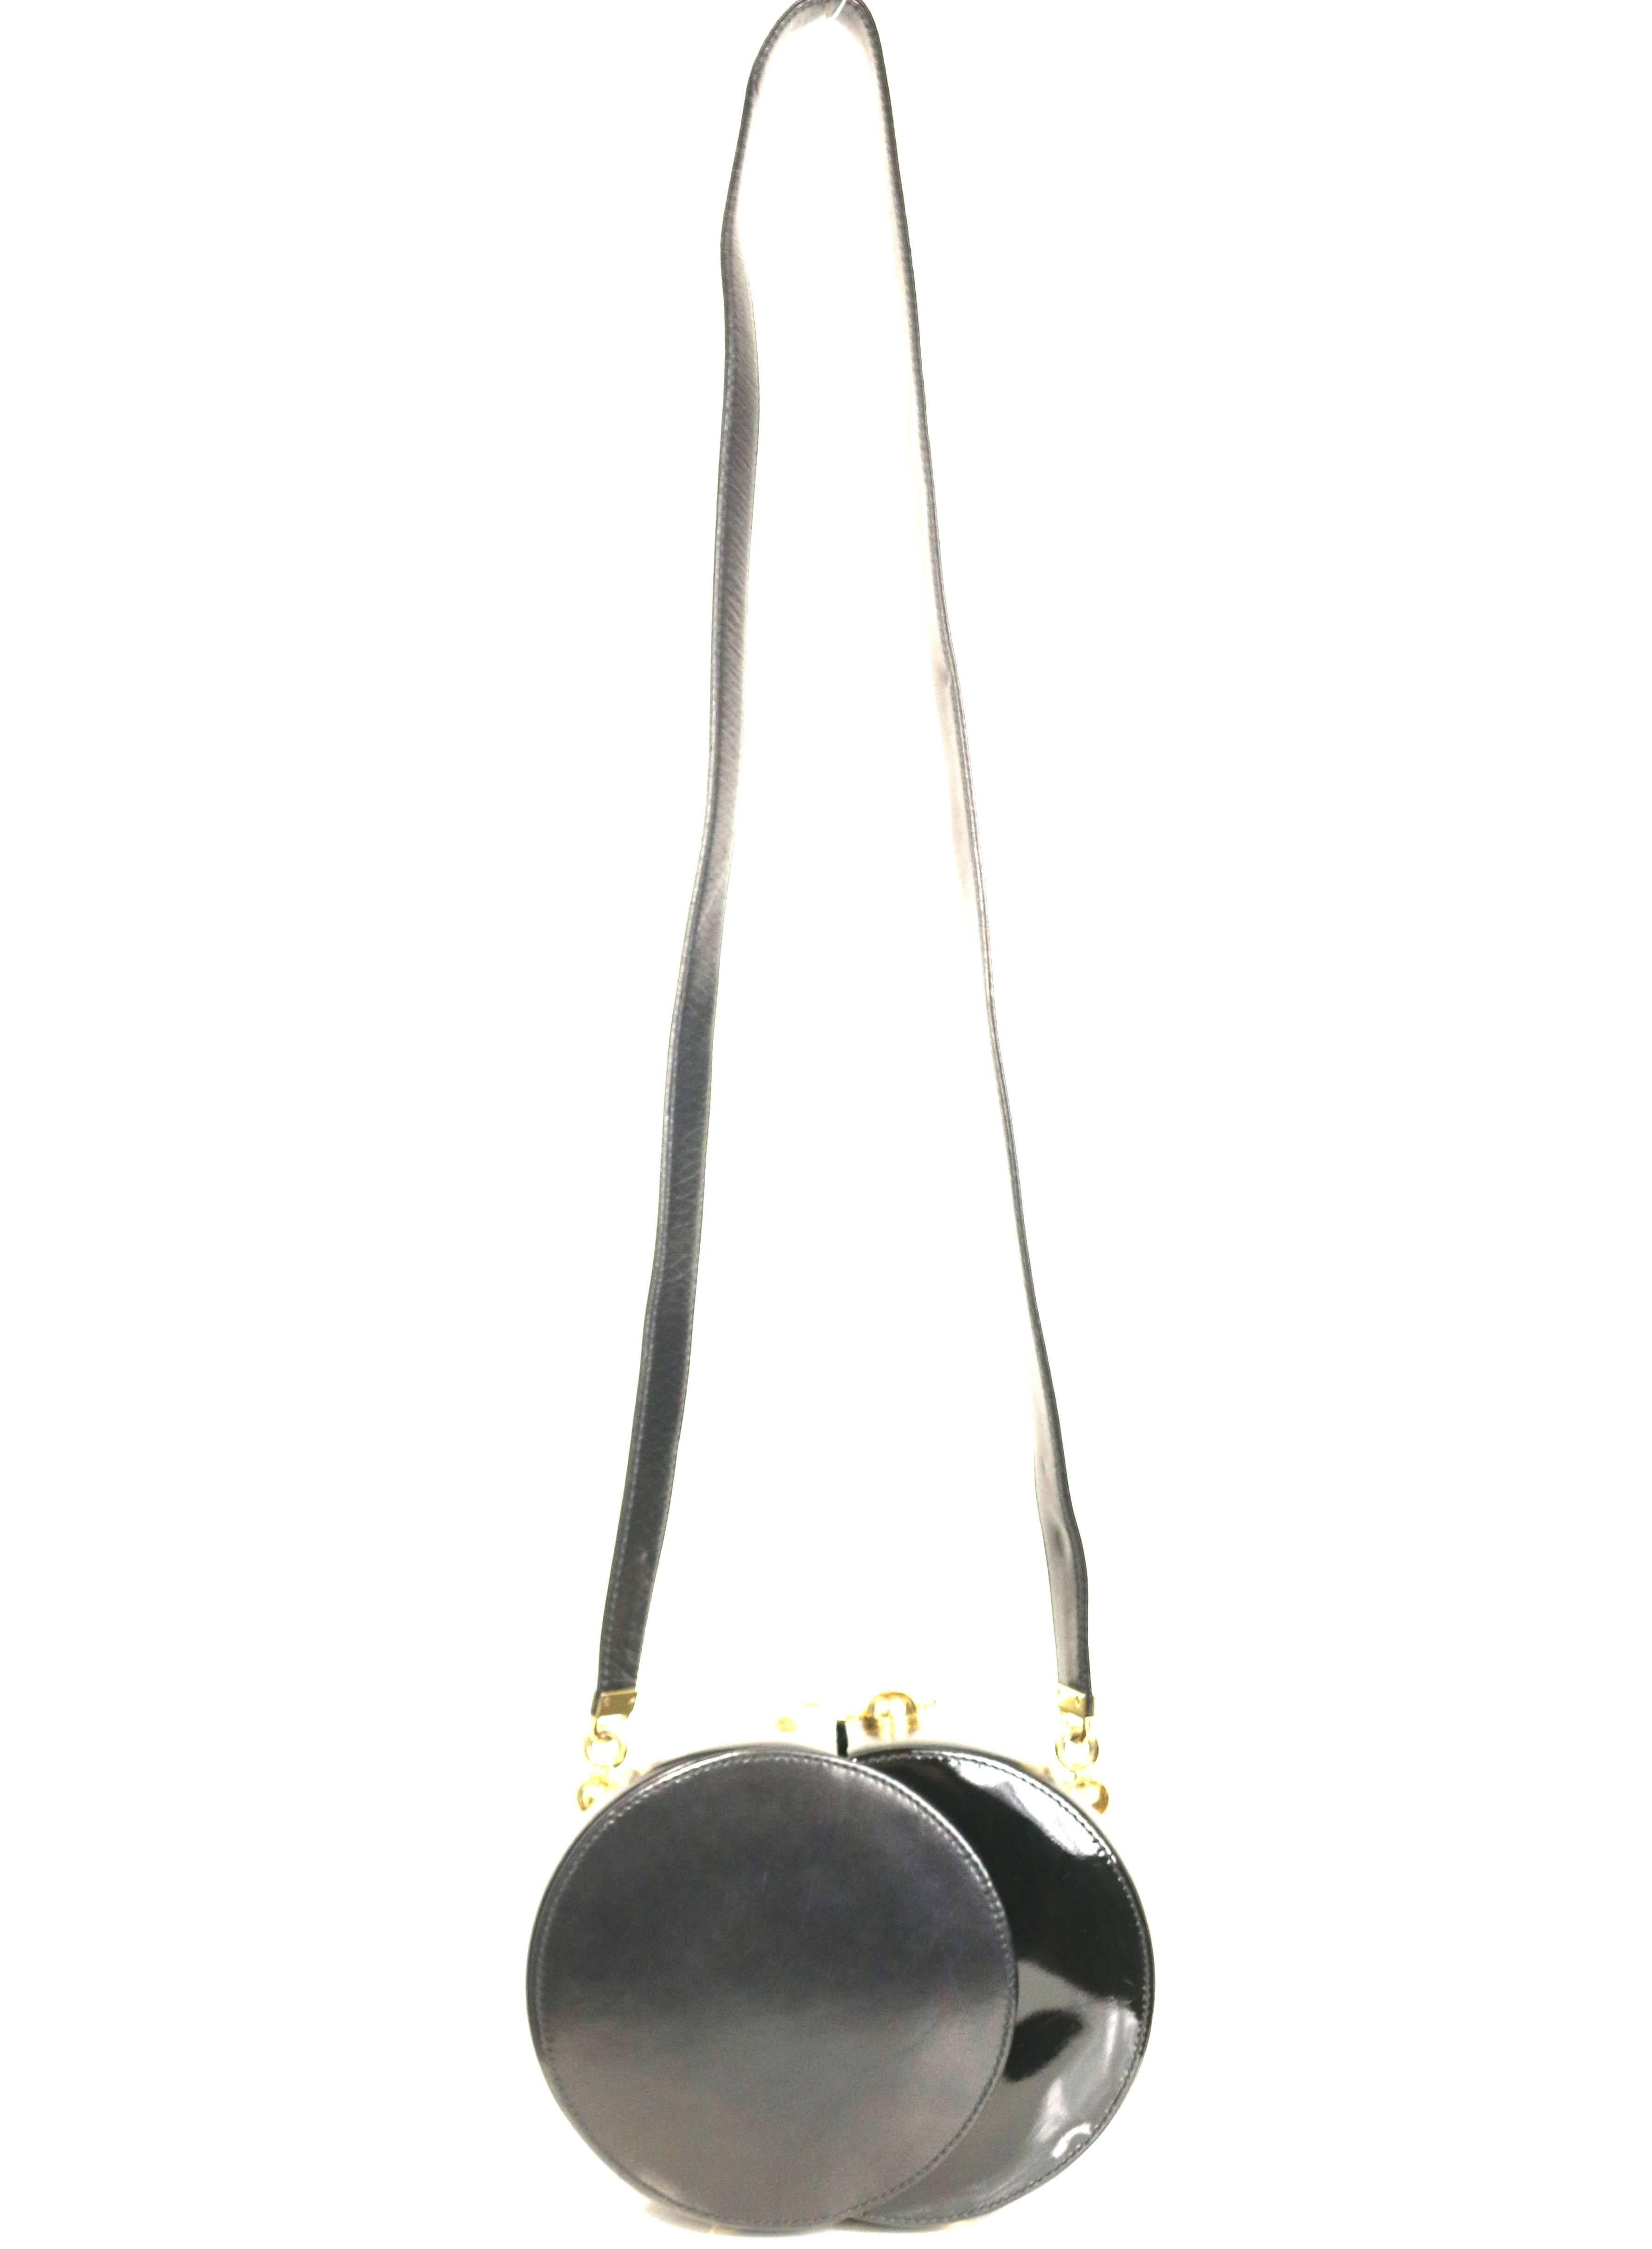 - Vintage 80s Franco Bellini black lambskin / patent leather round shoulder bag. 

- Featuring a gold toned hardware snap button closure. 

- Leather strap. 

- Gold toned studs on the bottom. 

- Diameter: 7.5 inches. Each circle diameter: 5.5